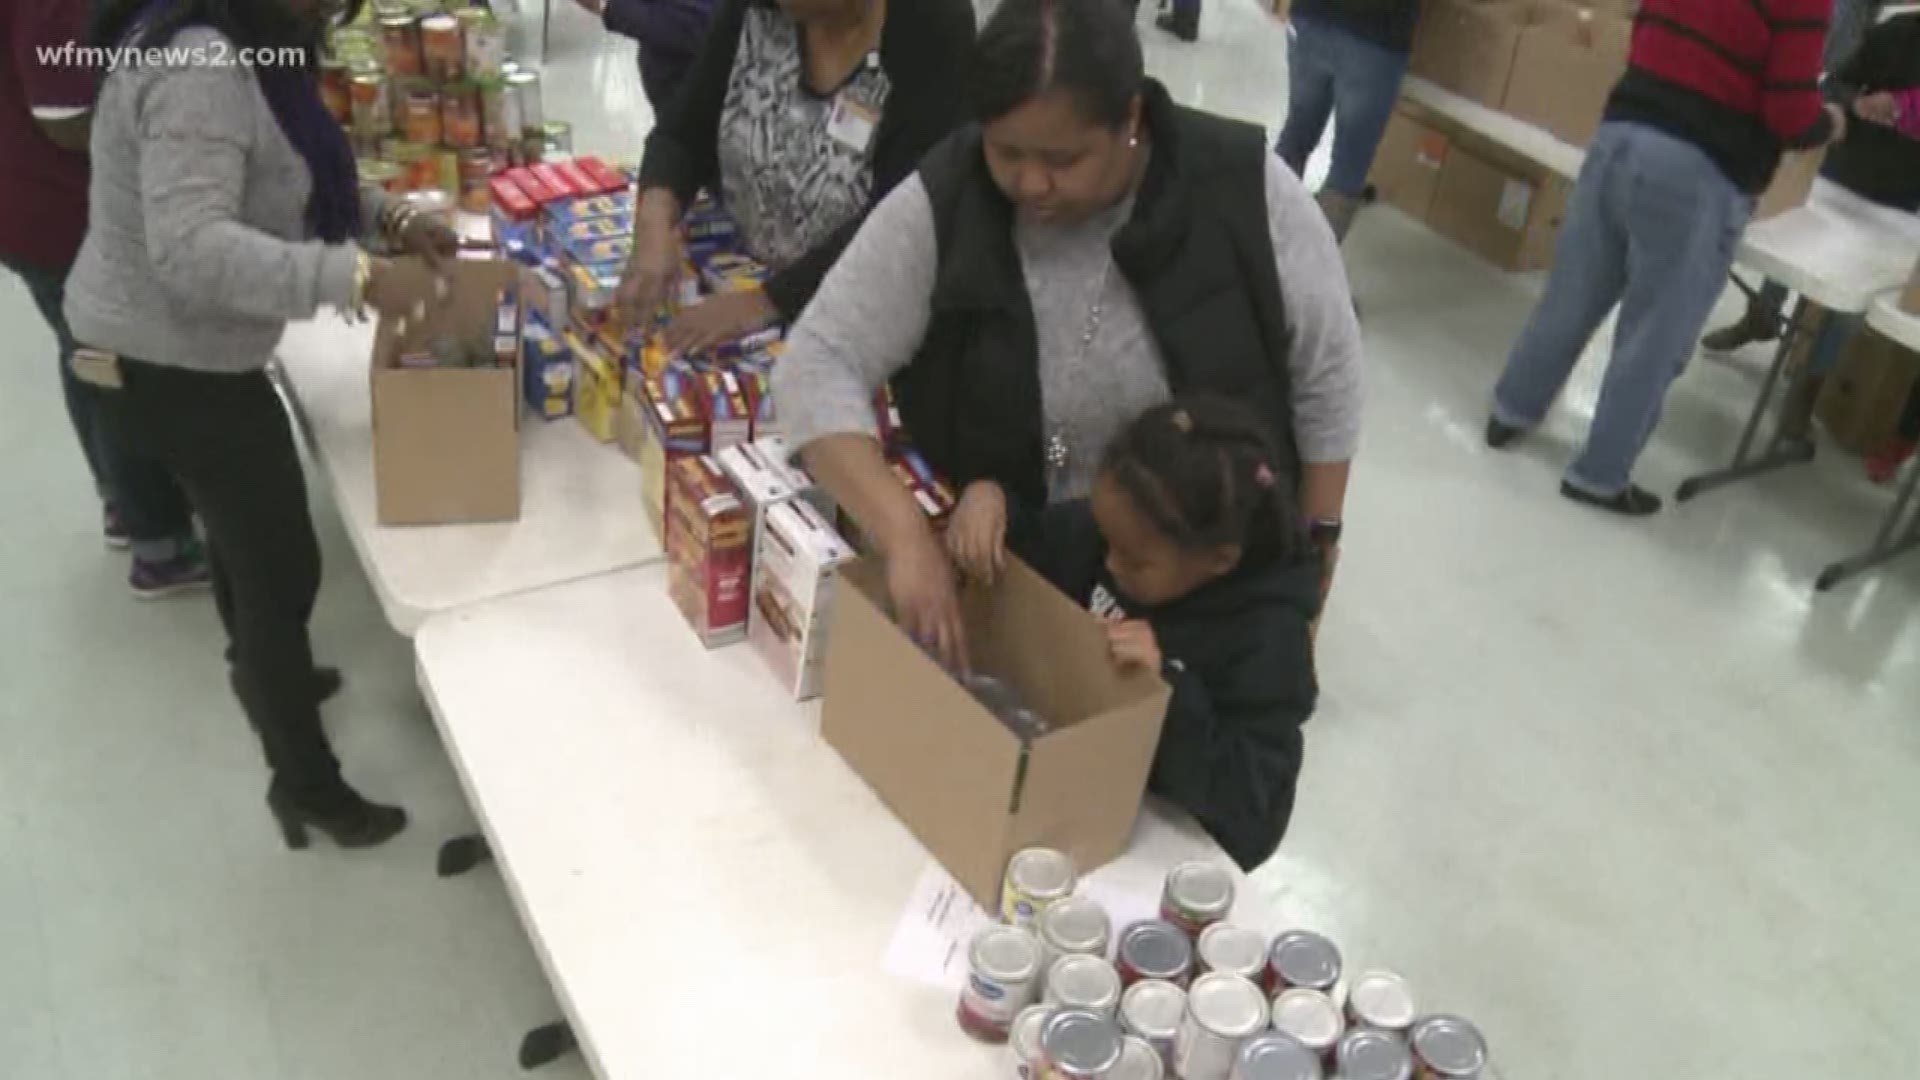 Volunteers packed up thousands of boxes with food for families in need this Thanksgiving.